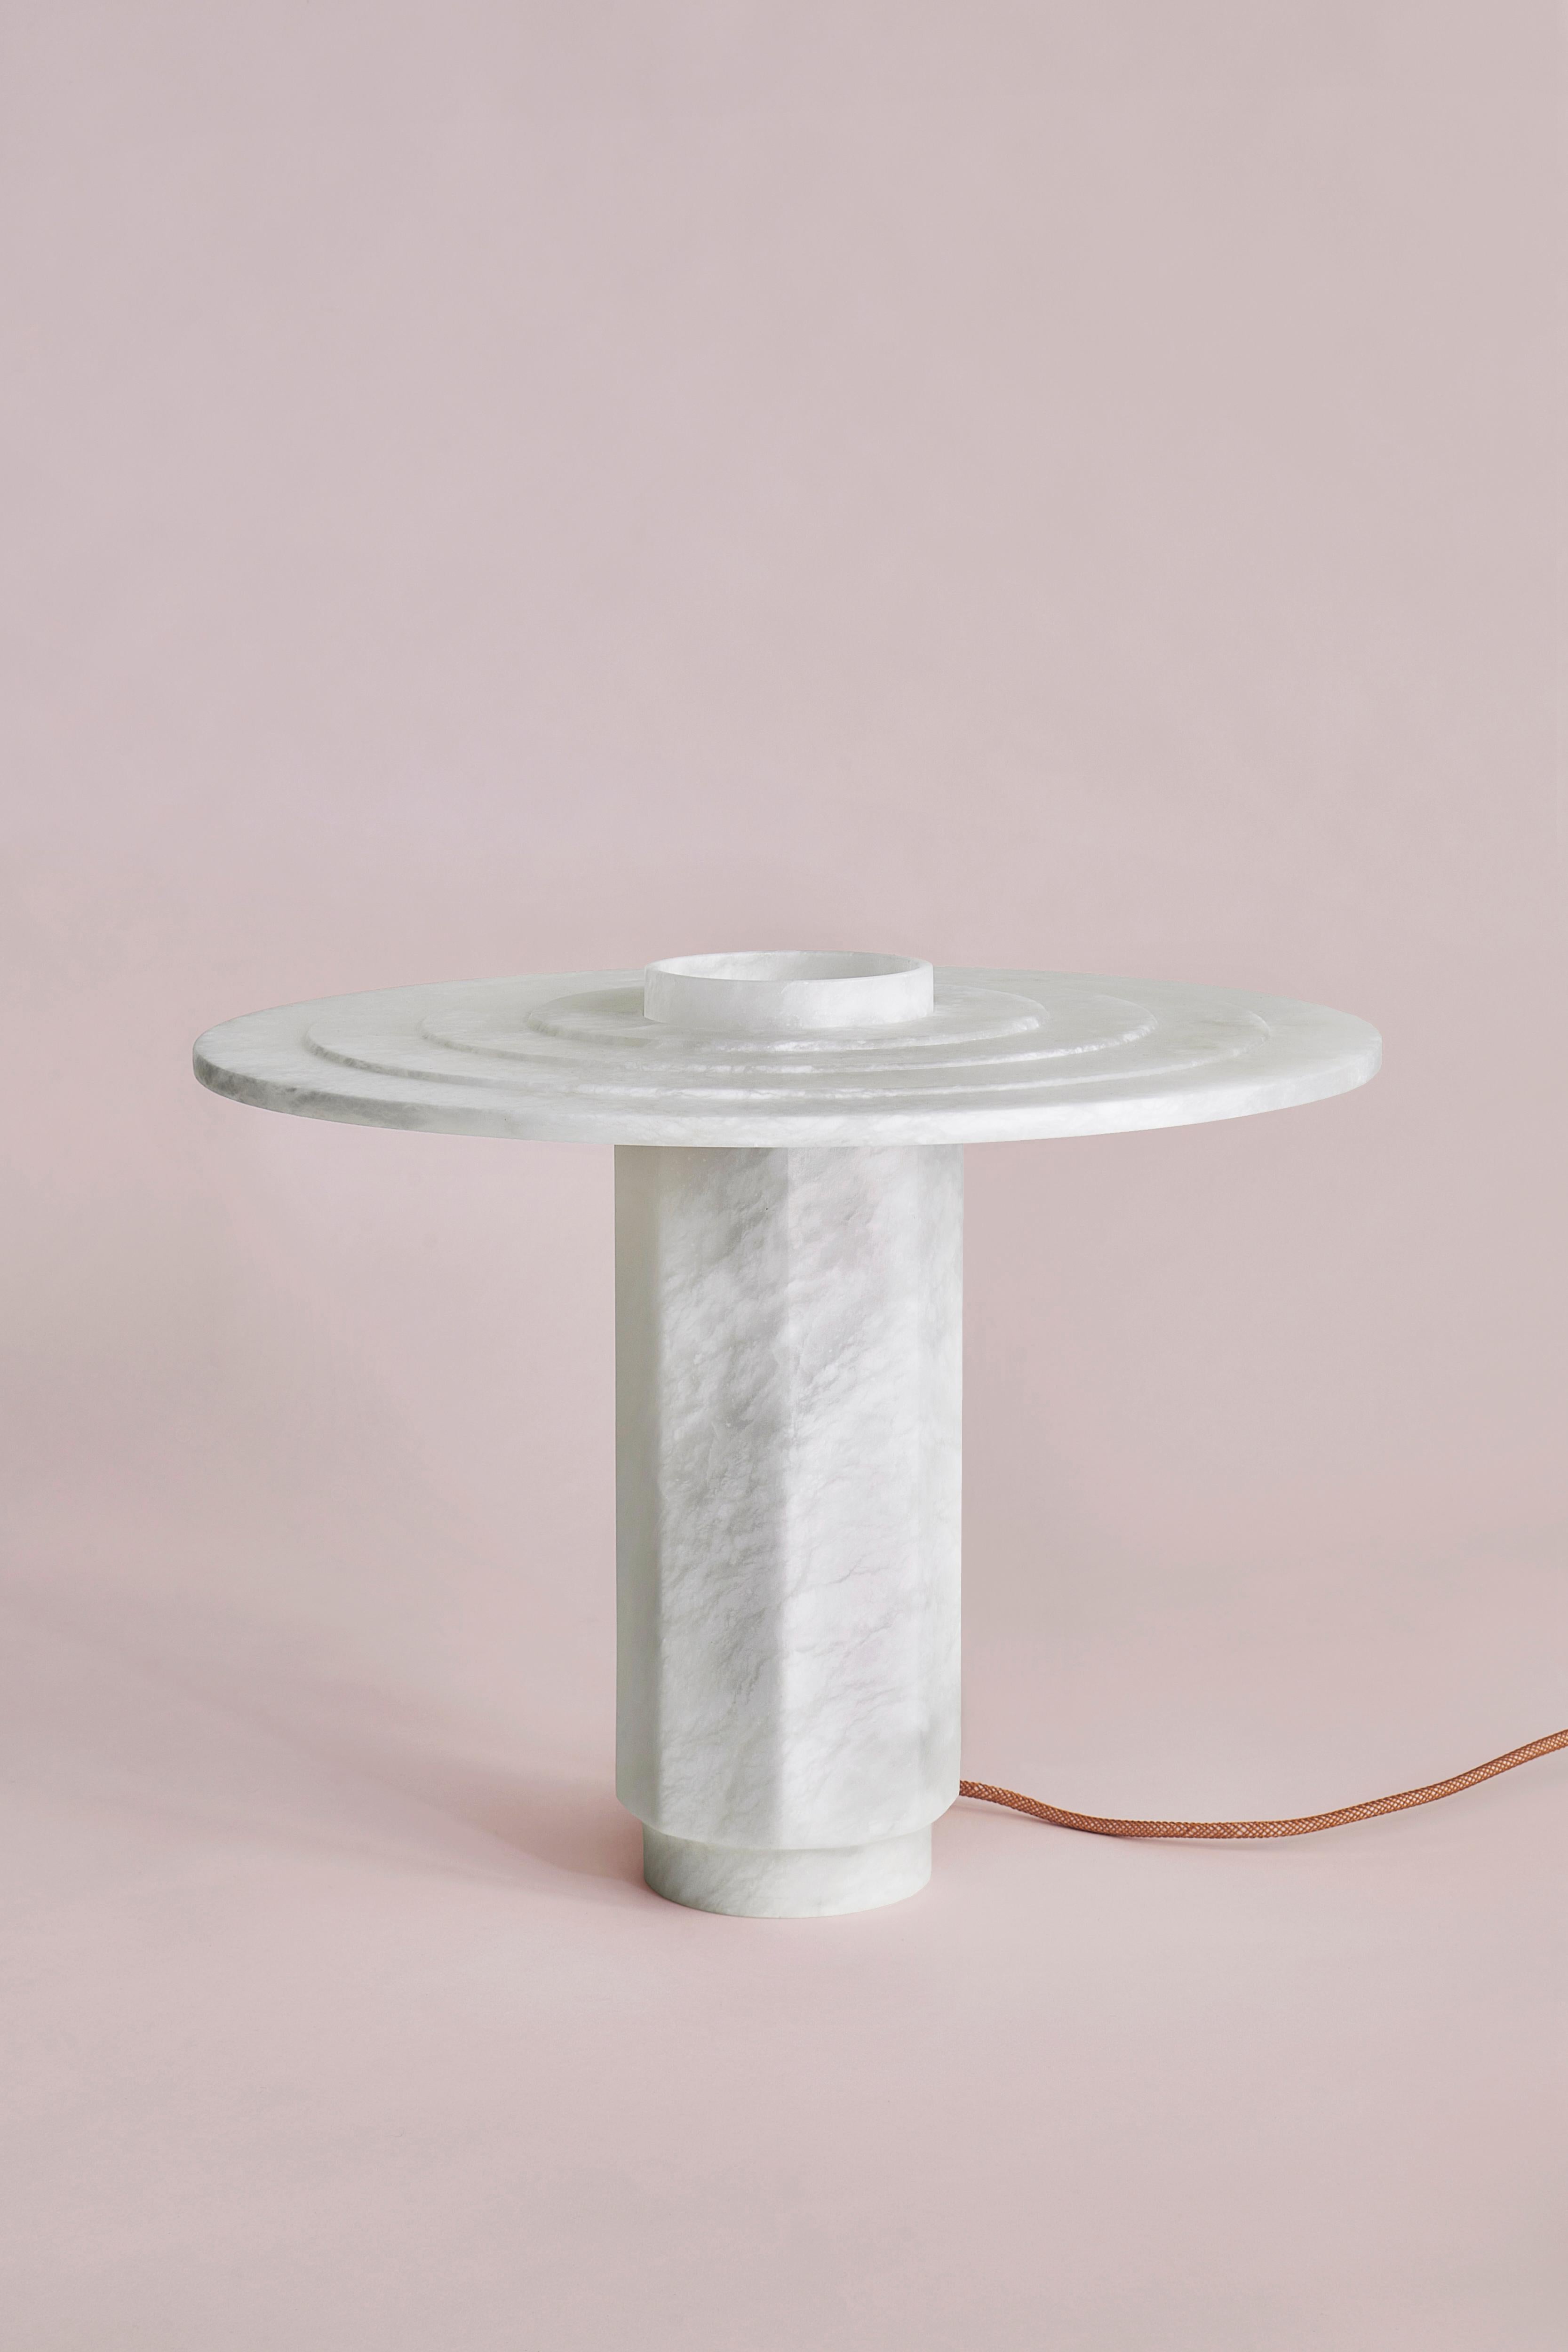 Disco Table Lamp by SB26
Dimensions: W 45 x D 45 x H 37 cm
Materials: Alabaster, LED Source.

In a consistently geometric vocabulary, this family of lamps unveils the
translucent and organic nature of alabaster.
A contrast of shapes and